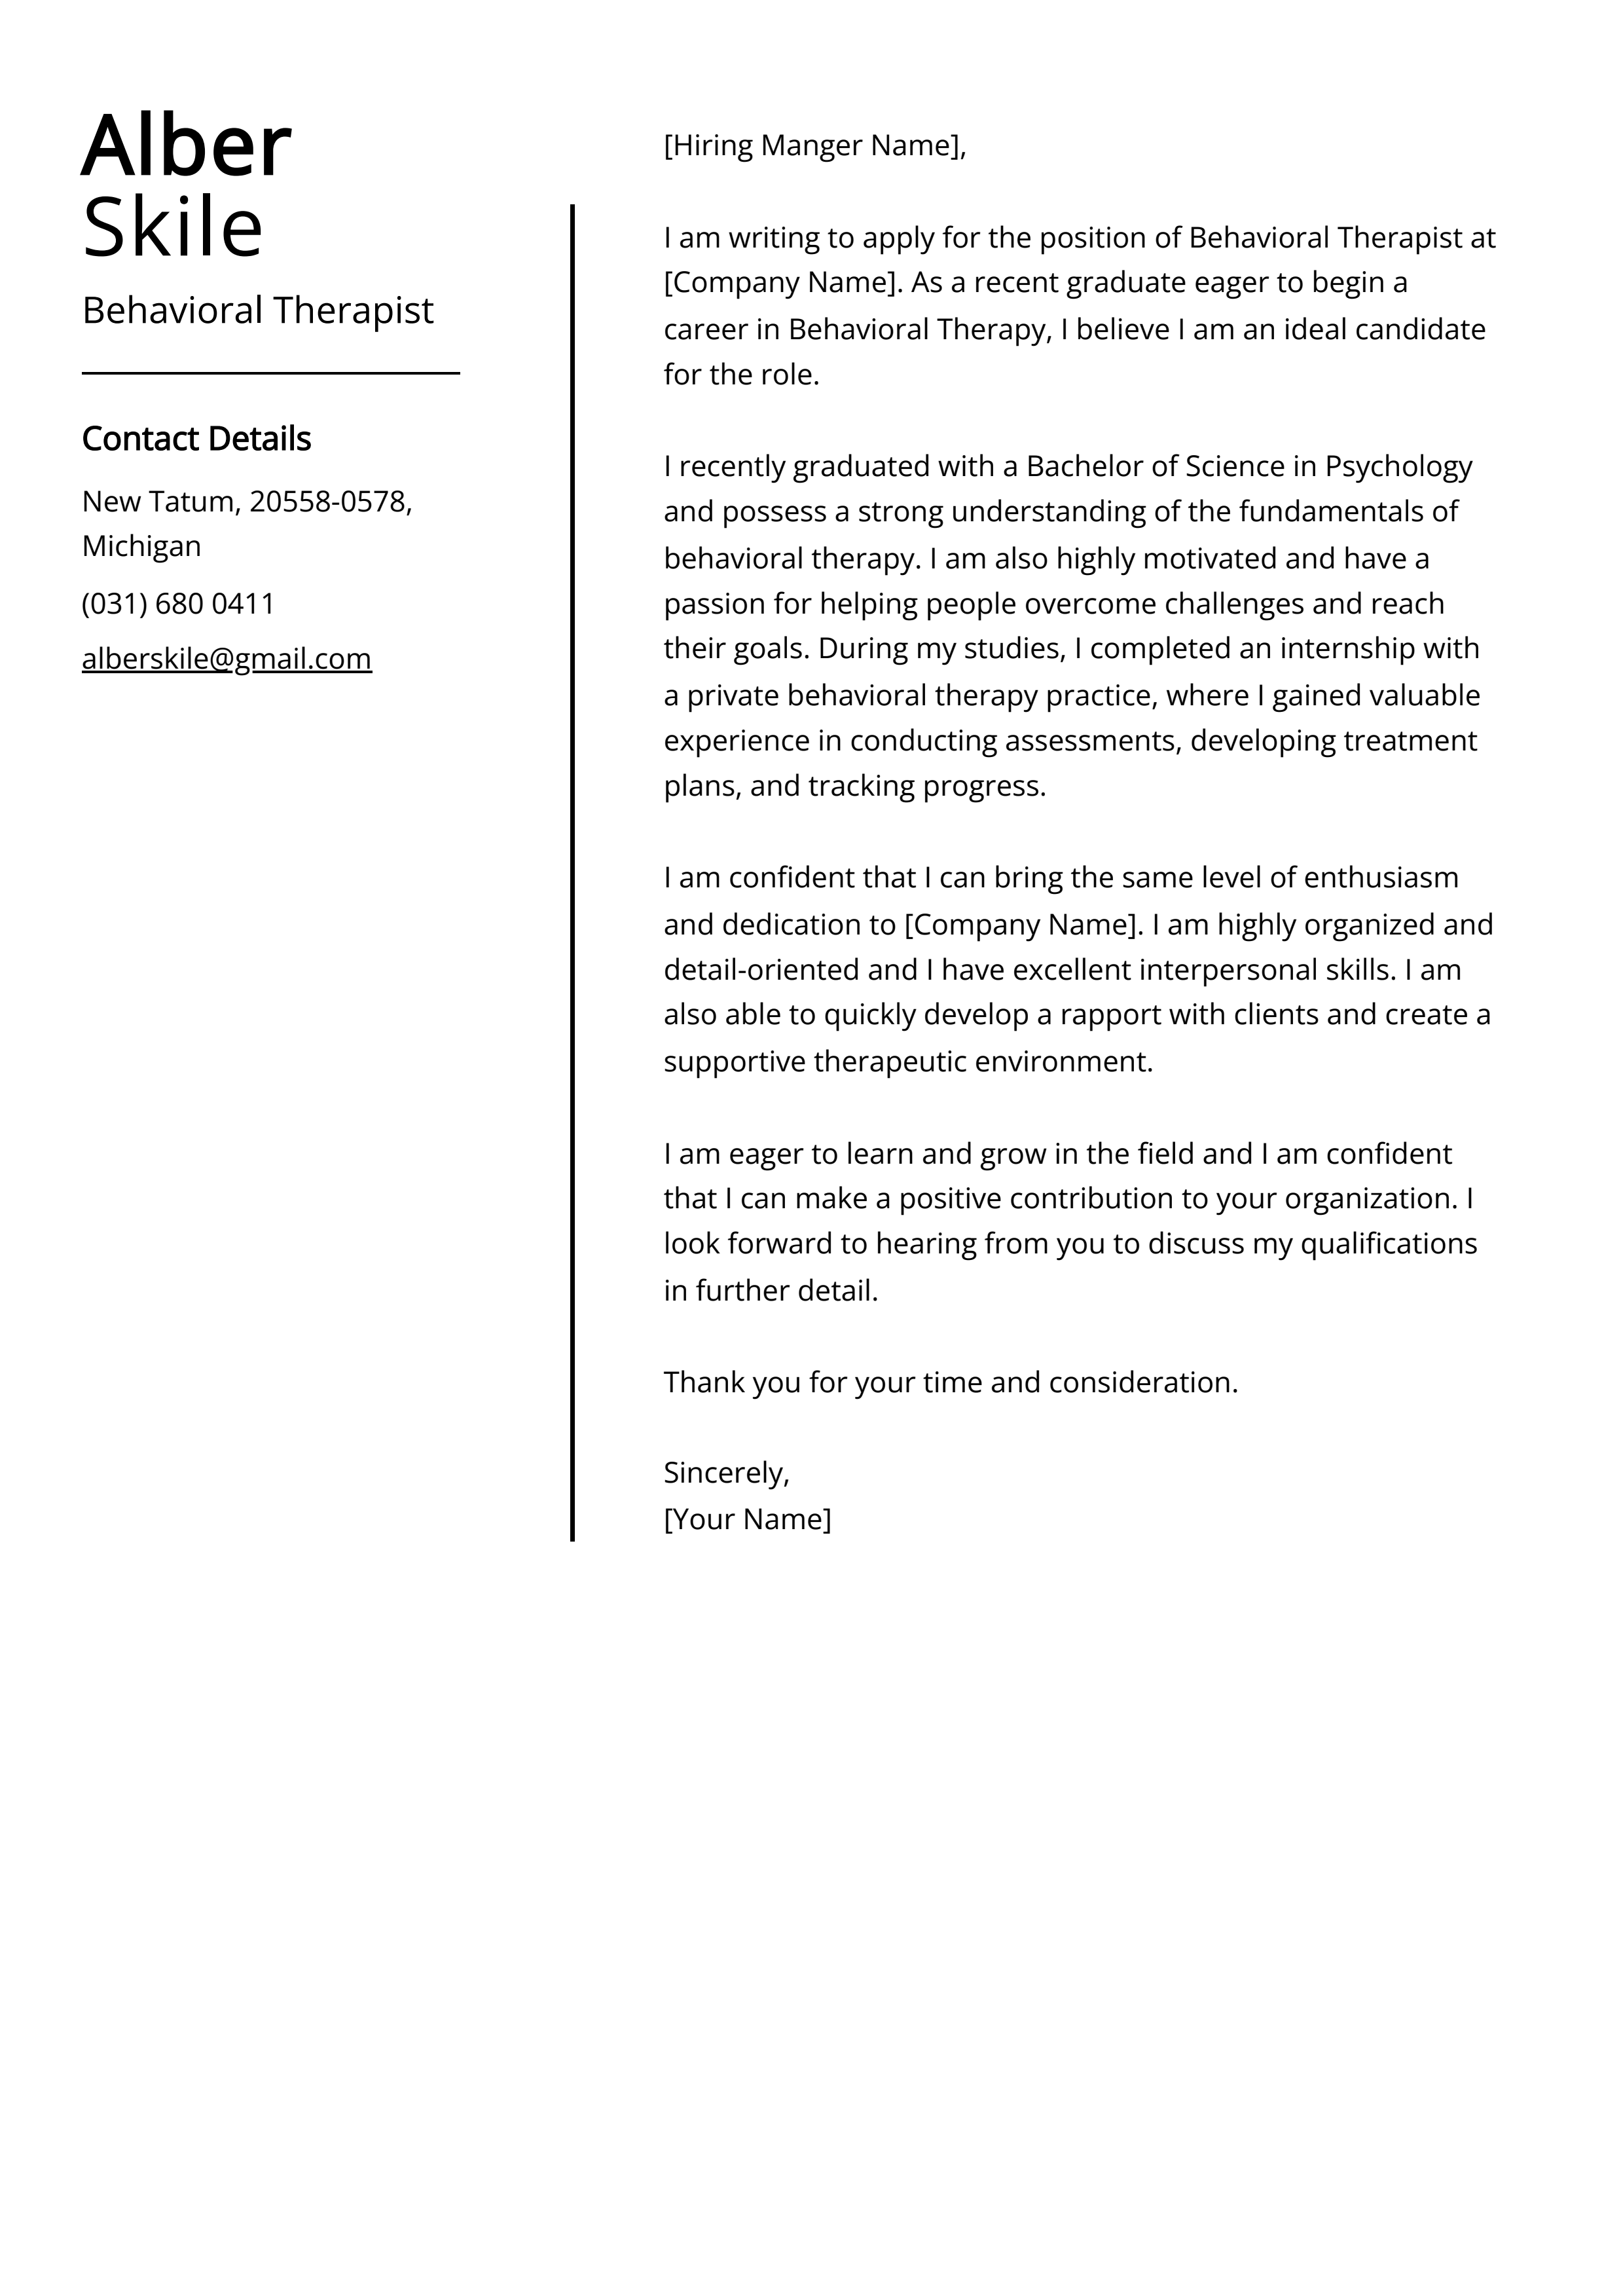 Experienced Behavioral Therapist Cover Letter Example